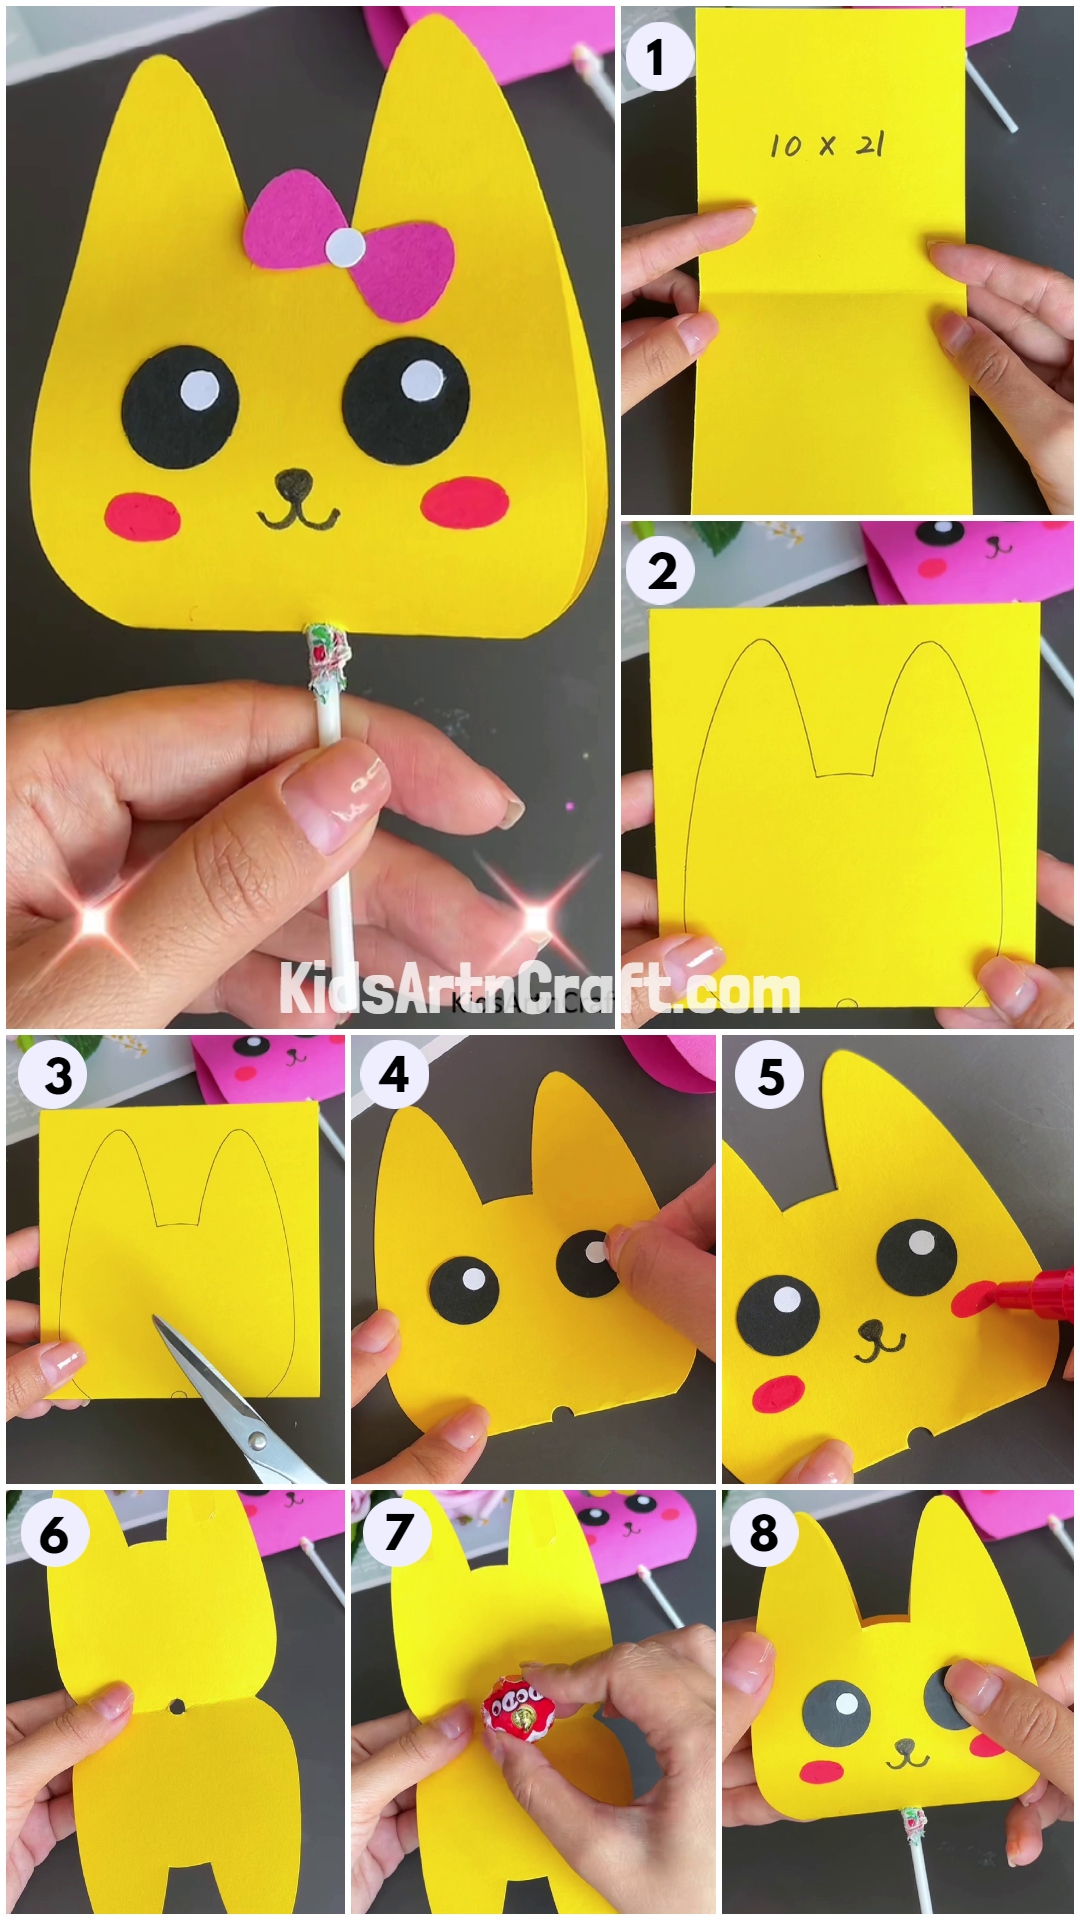 Crafting Pikachu Candy Out Of Paper - How To Make Pikachu Candy Craft Using Paper